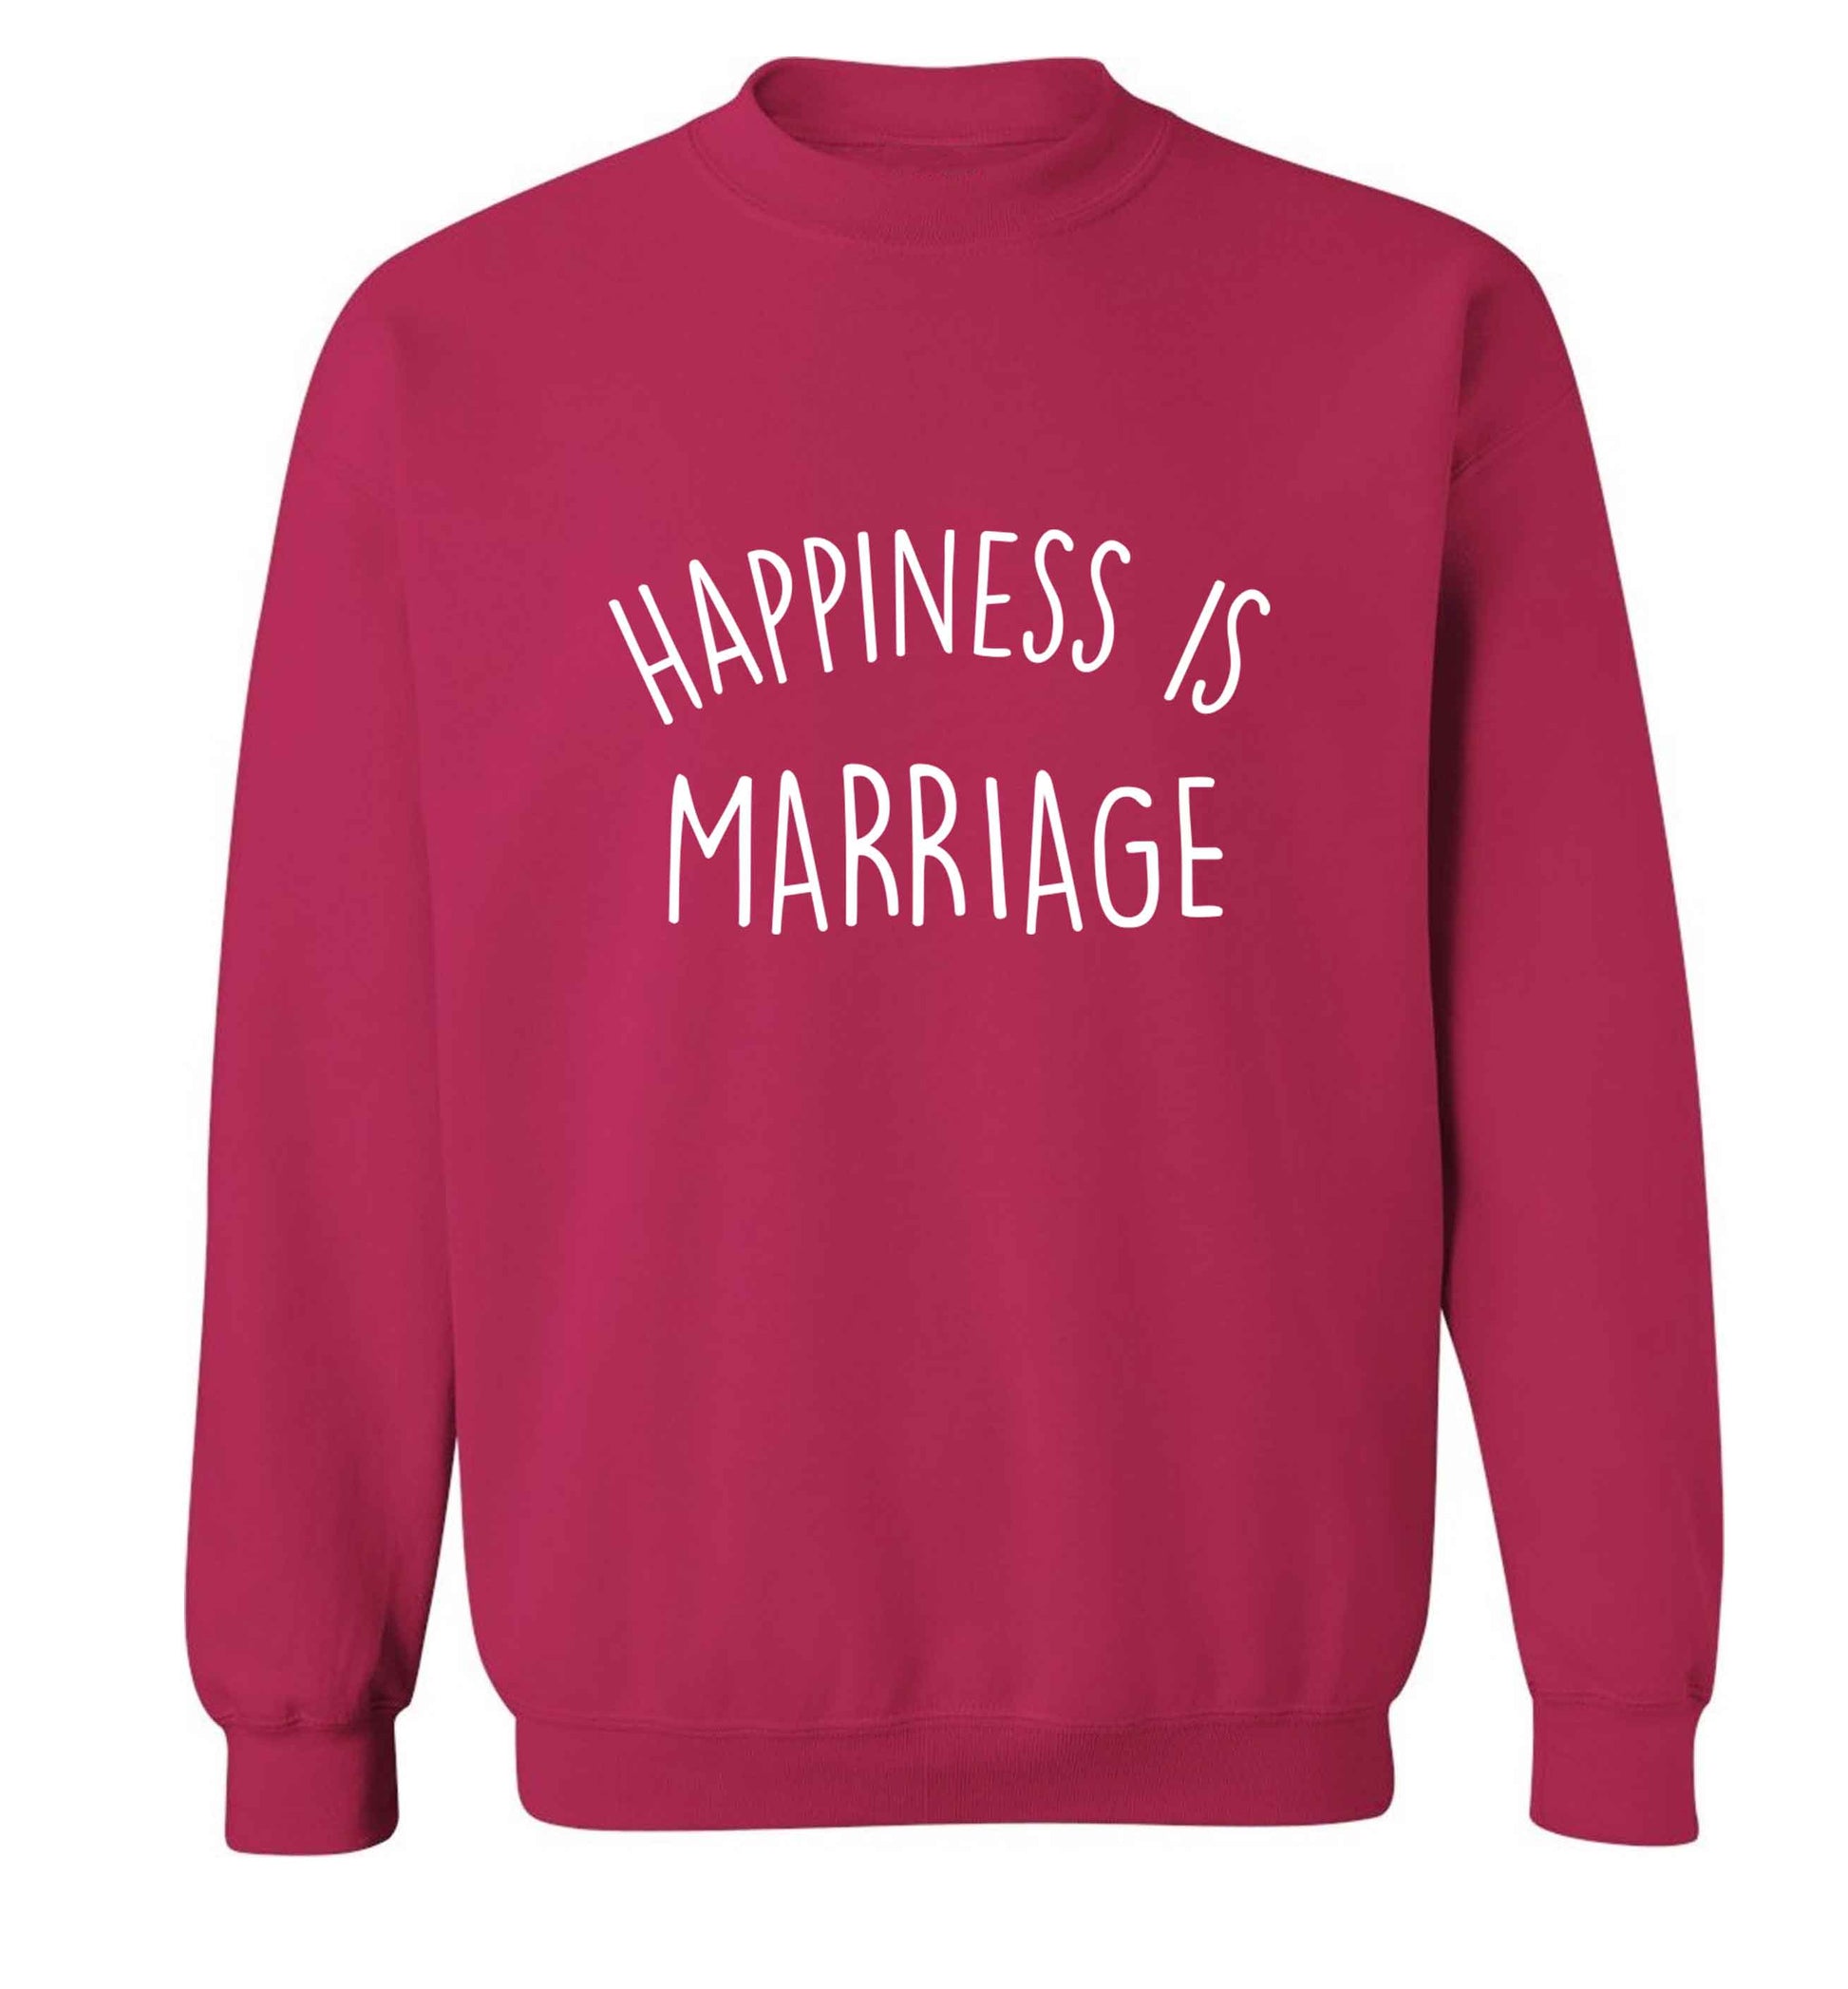 Happiness is marriage adult's unisex pink sweater 2XL